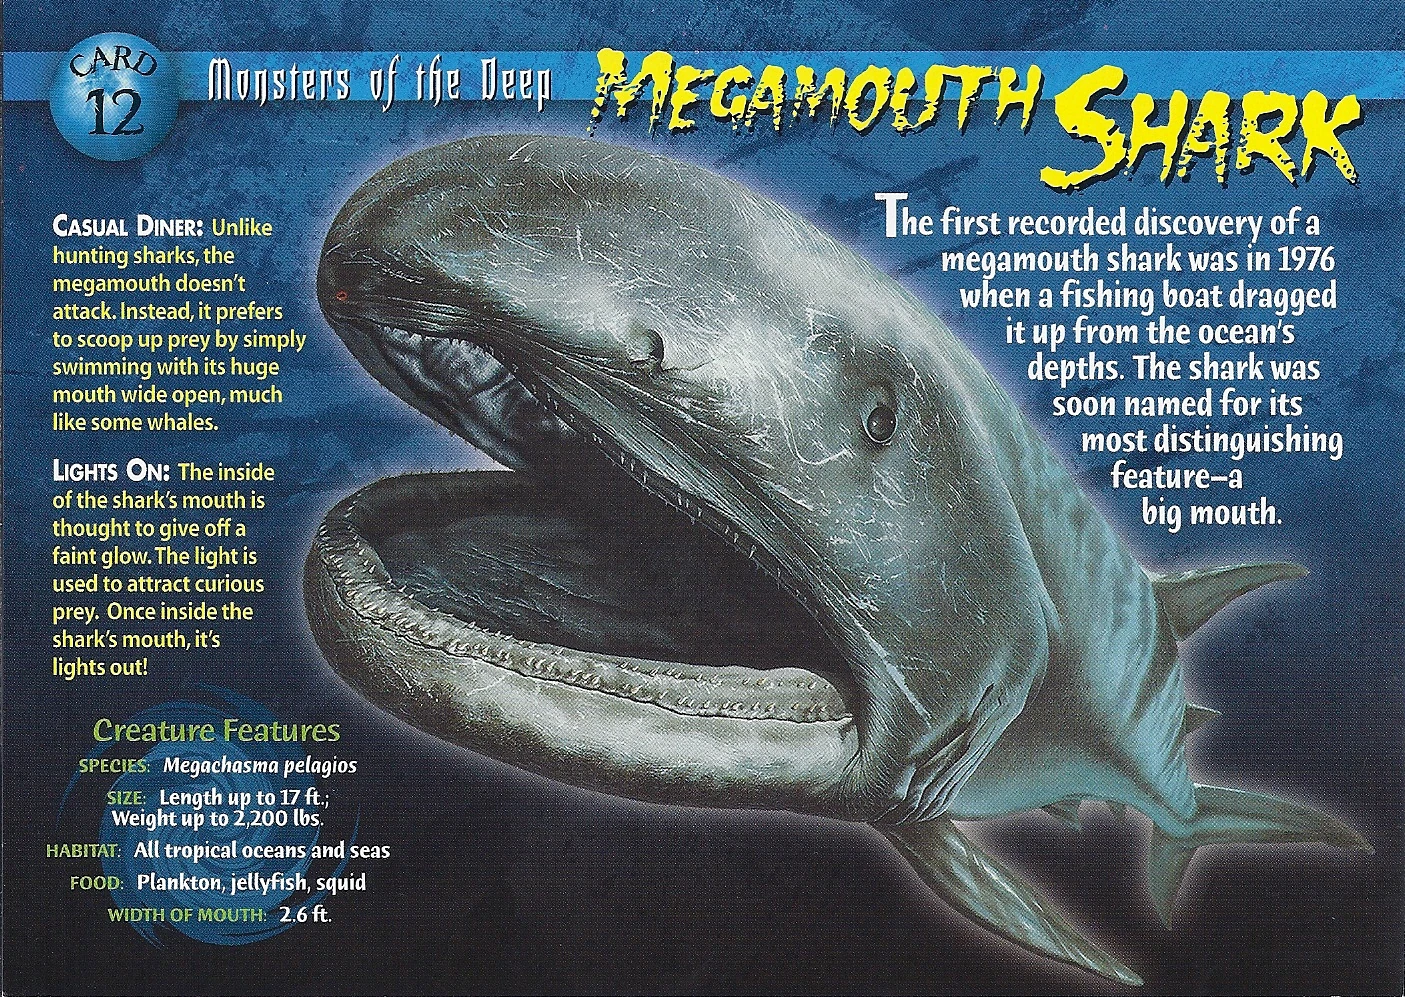 https://static.wikia.nocookie.net/wierdnwildcreatures/images/a/a5/Megamouth_Shark_front.jpg/revision/latest?cb=20130910001219